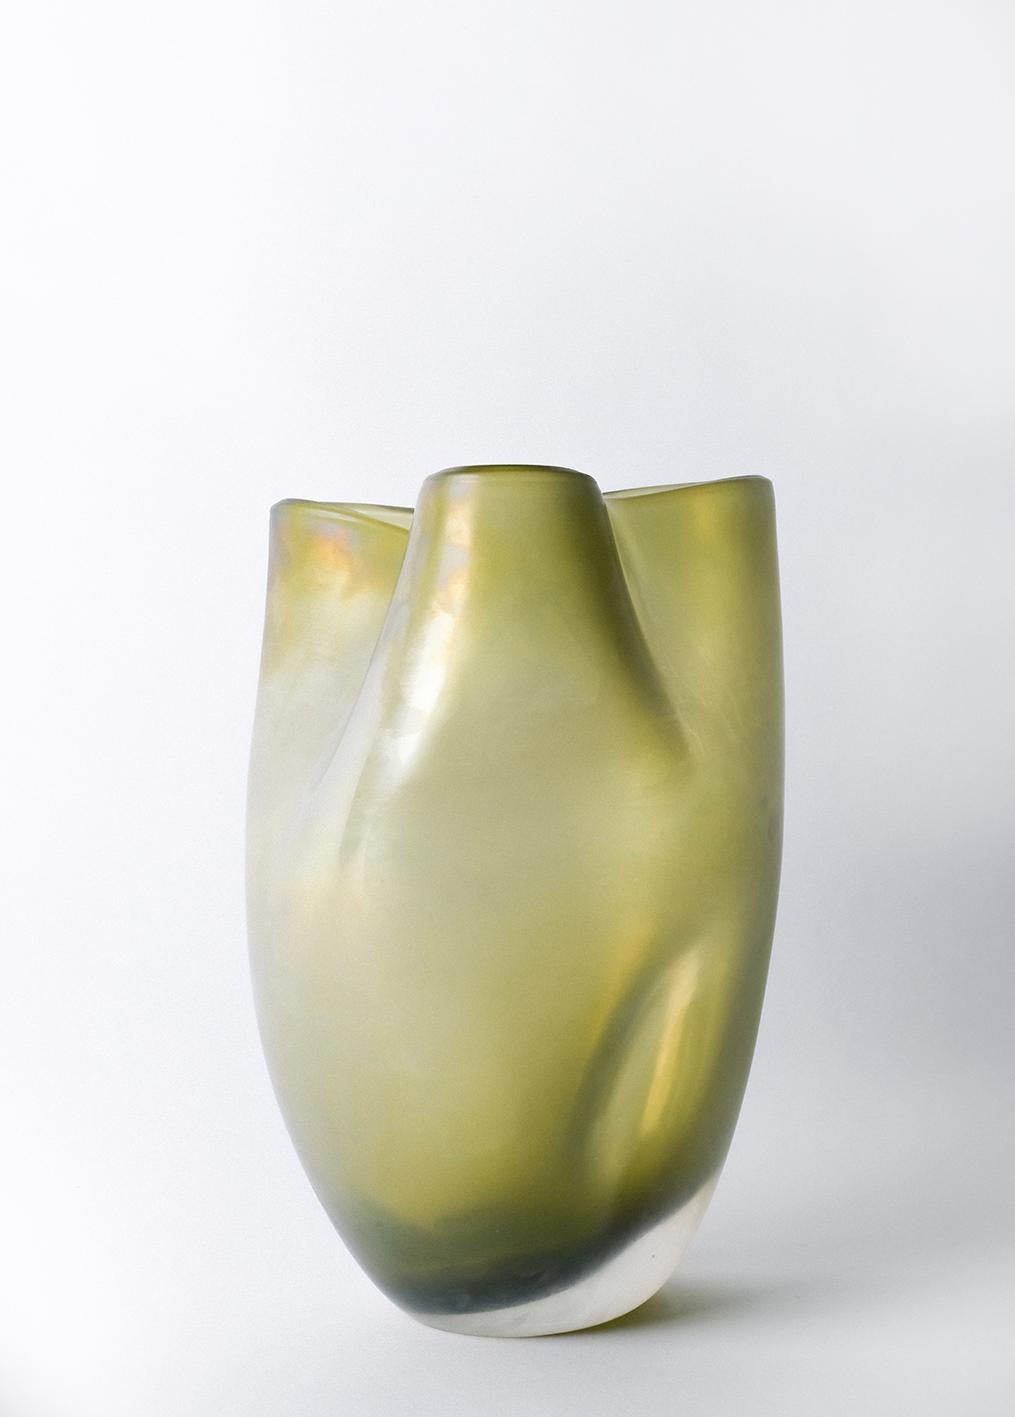 Bacan vase by Purho
Dimensions: D28 x H40 cm
Materials: Murano glass
Available in other colors.

Bacan is a vase from the Laguna Collection designed by Ludovica+Roberto Palomba for Purho in spring 2022.
Characterised by generous forms with